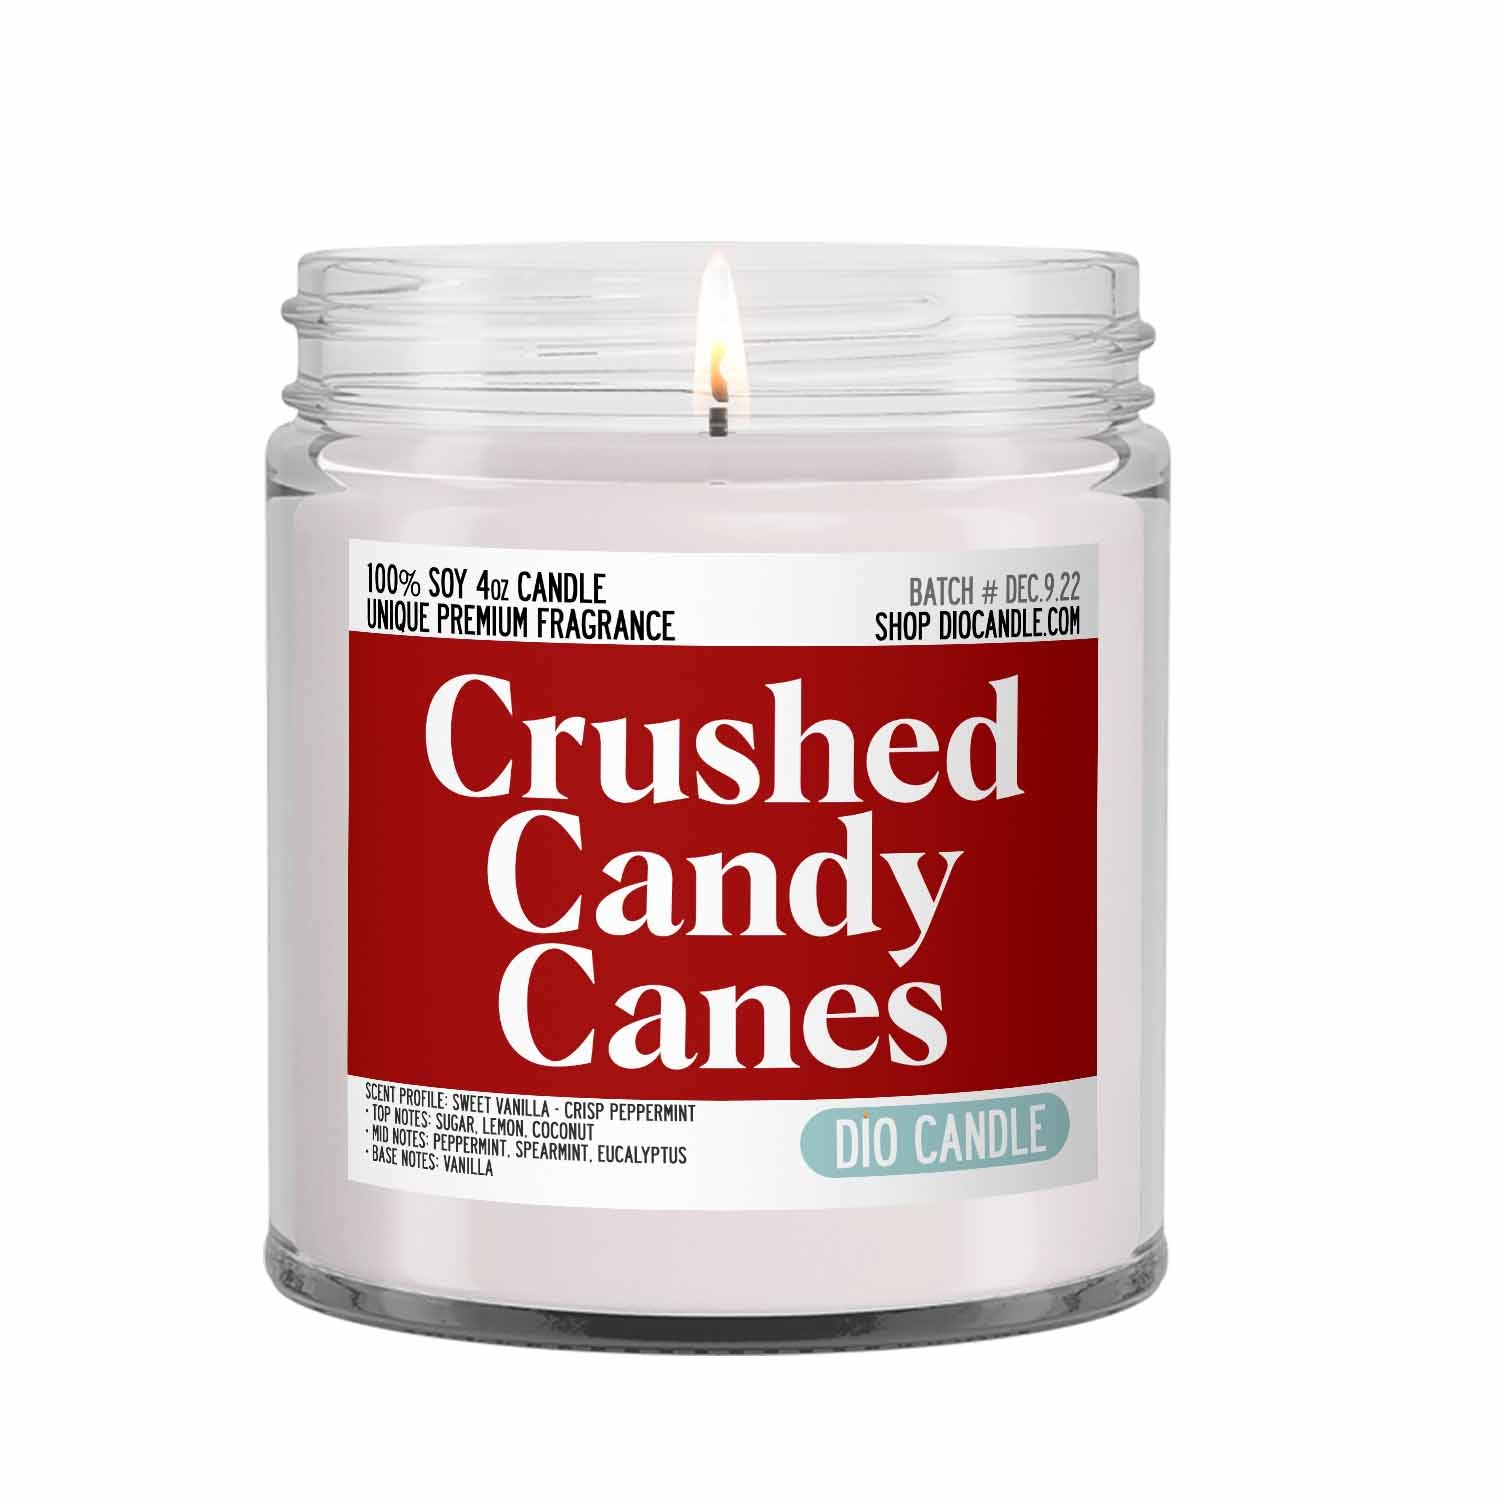 Crushed Candy Canes Candle